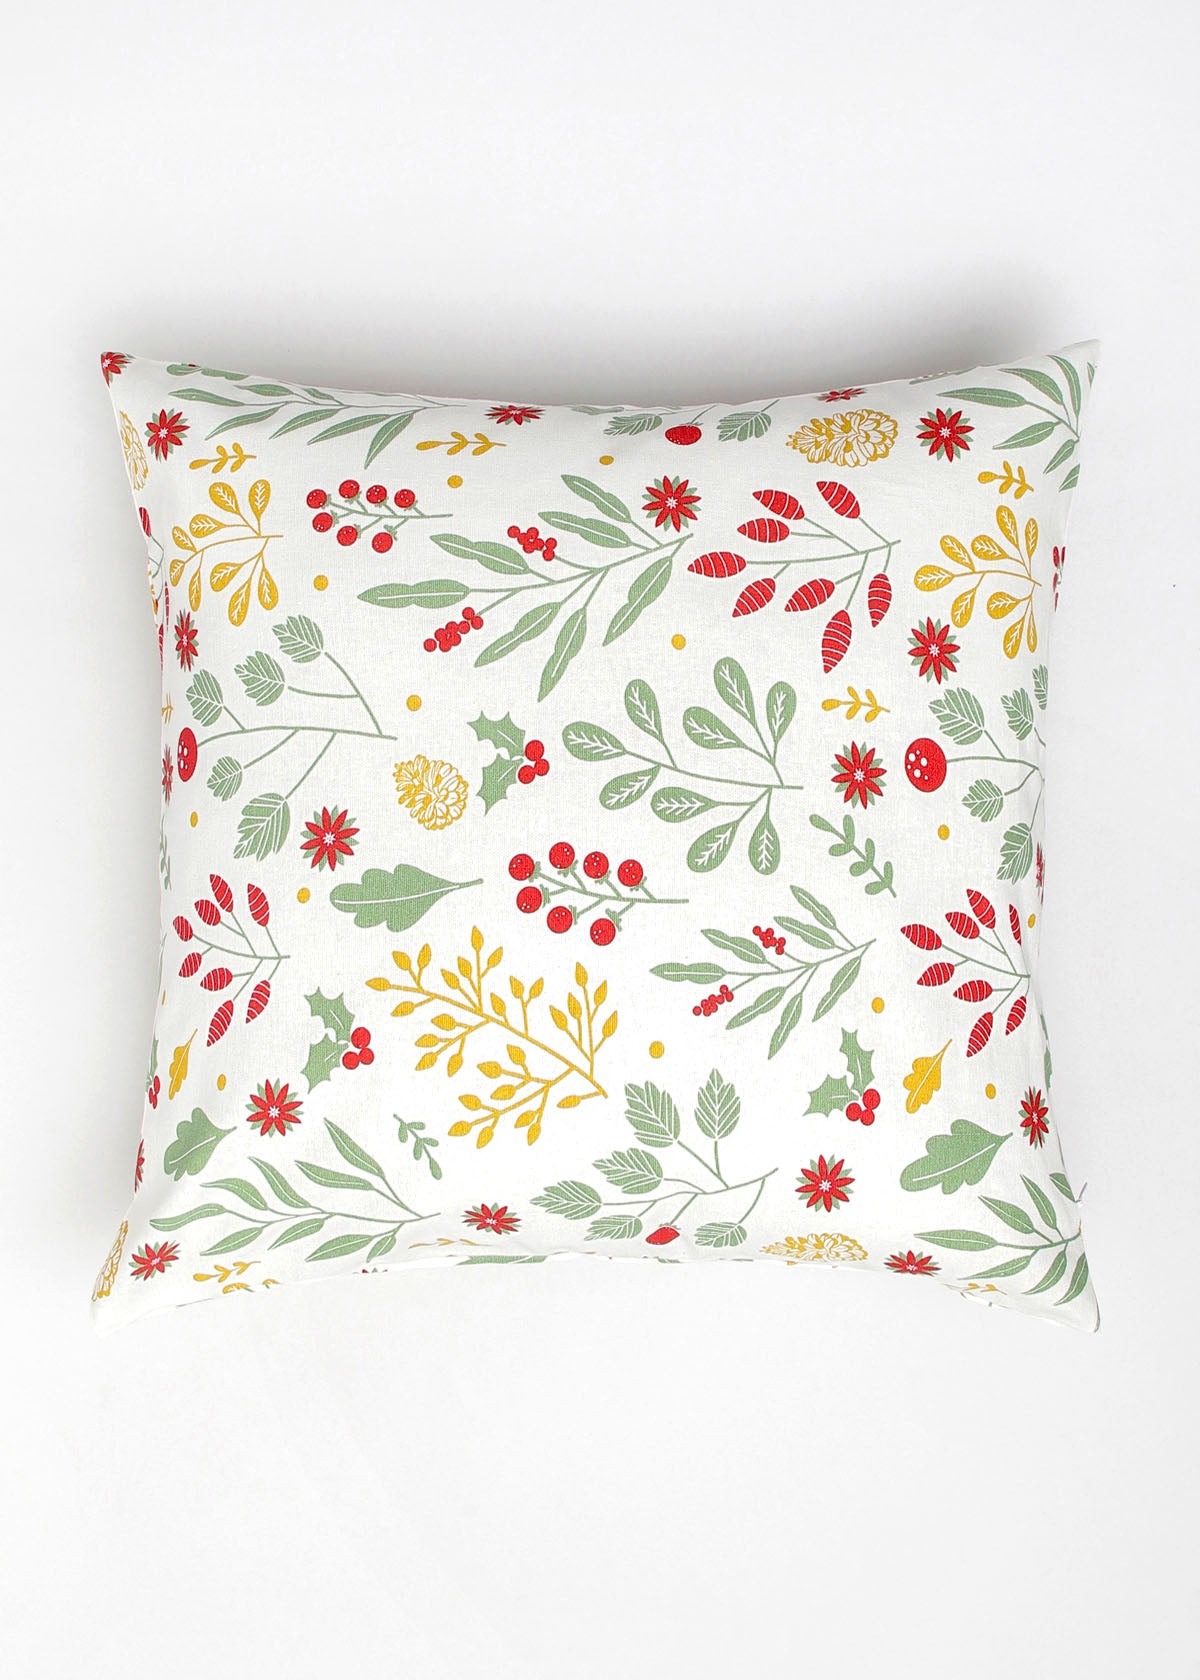 Foraged Berries Printed Cotton Cushion Cover - Multicolor